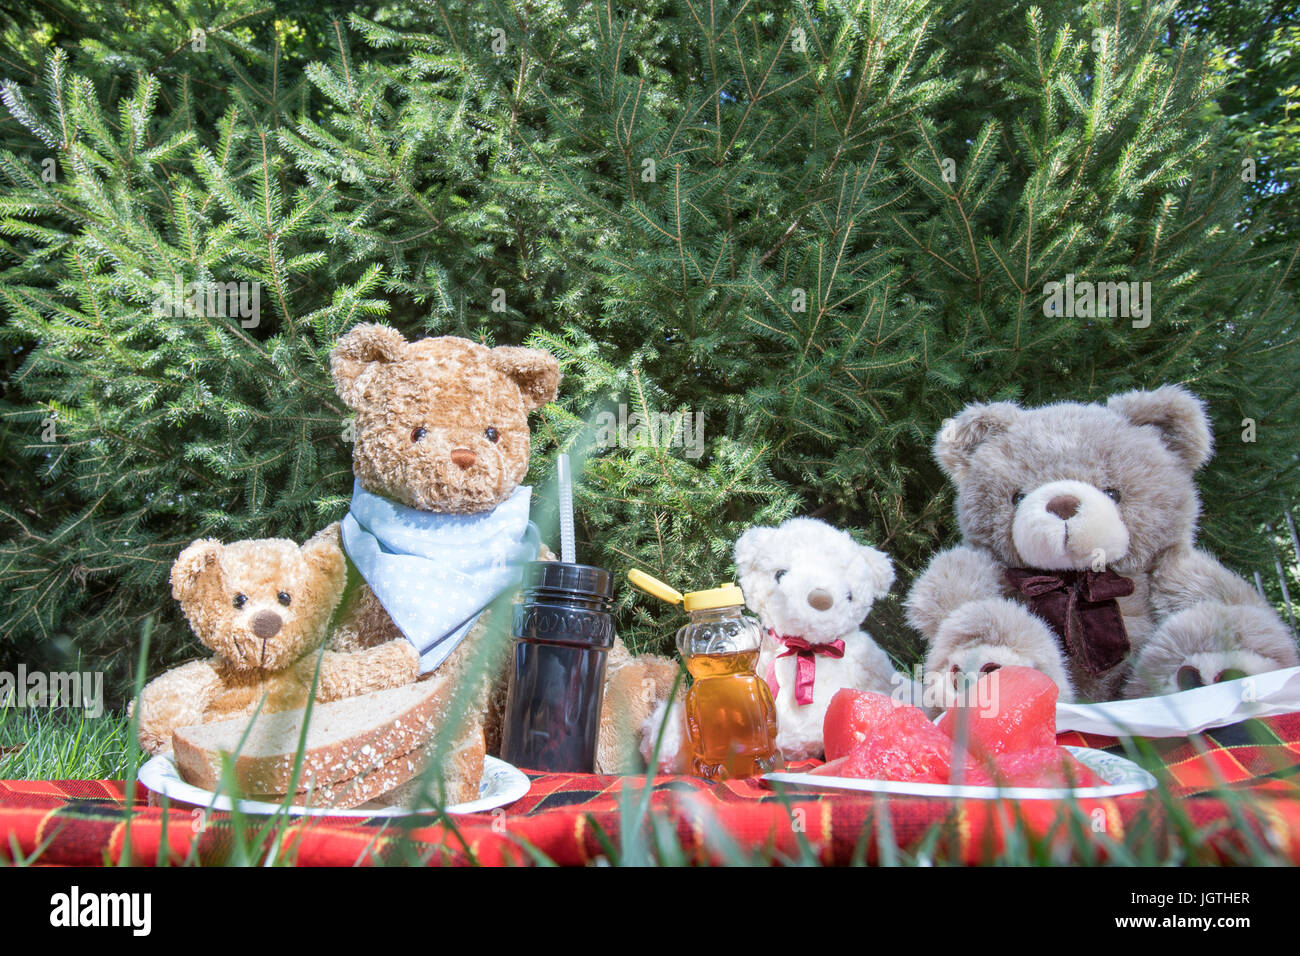 Teddy Bears on picnic blanket oudoors in grass with sandwiches ...